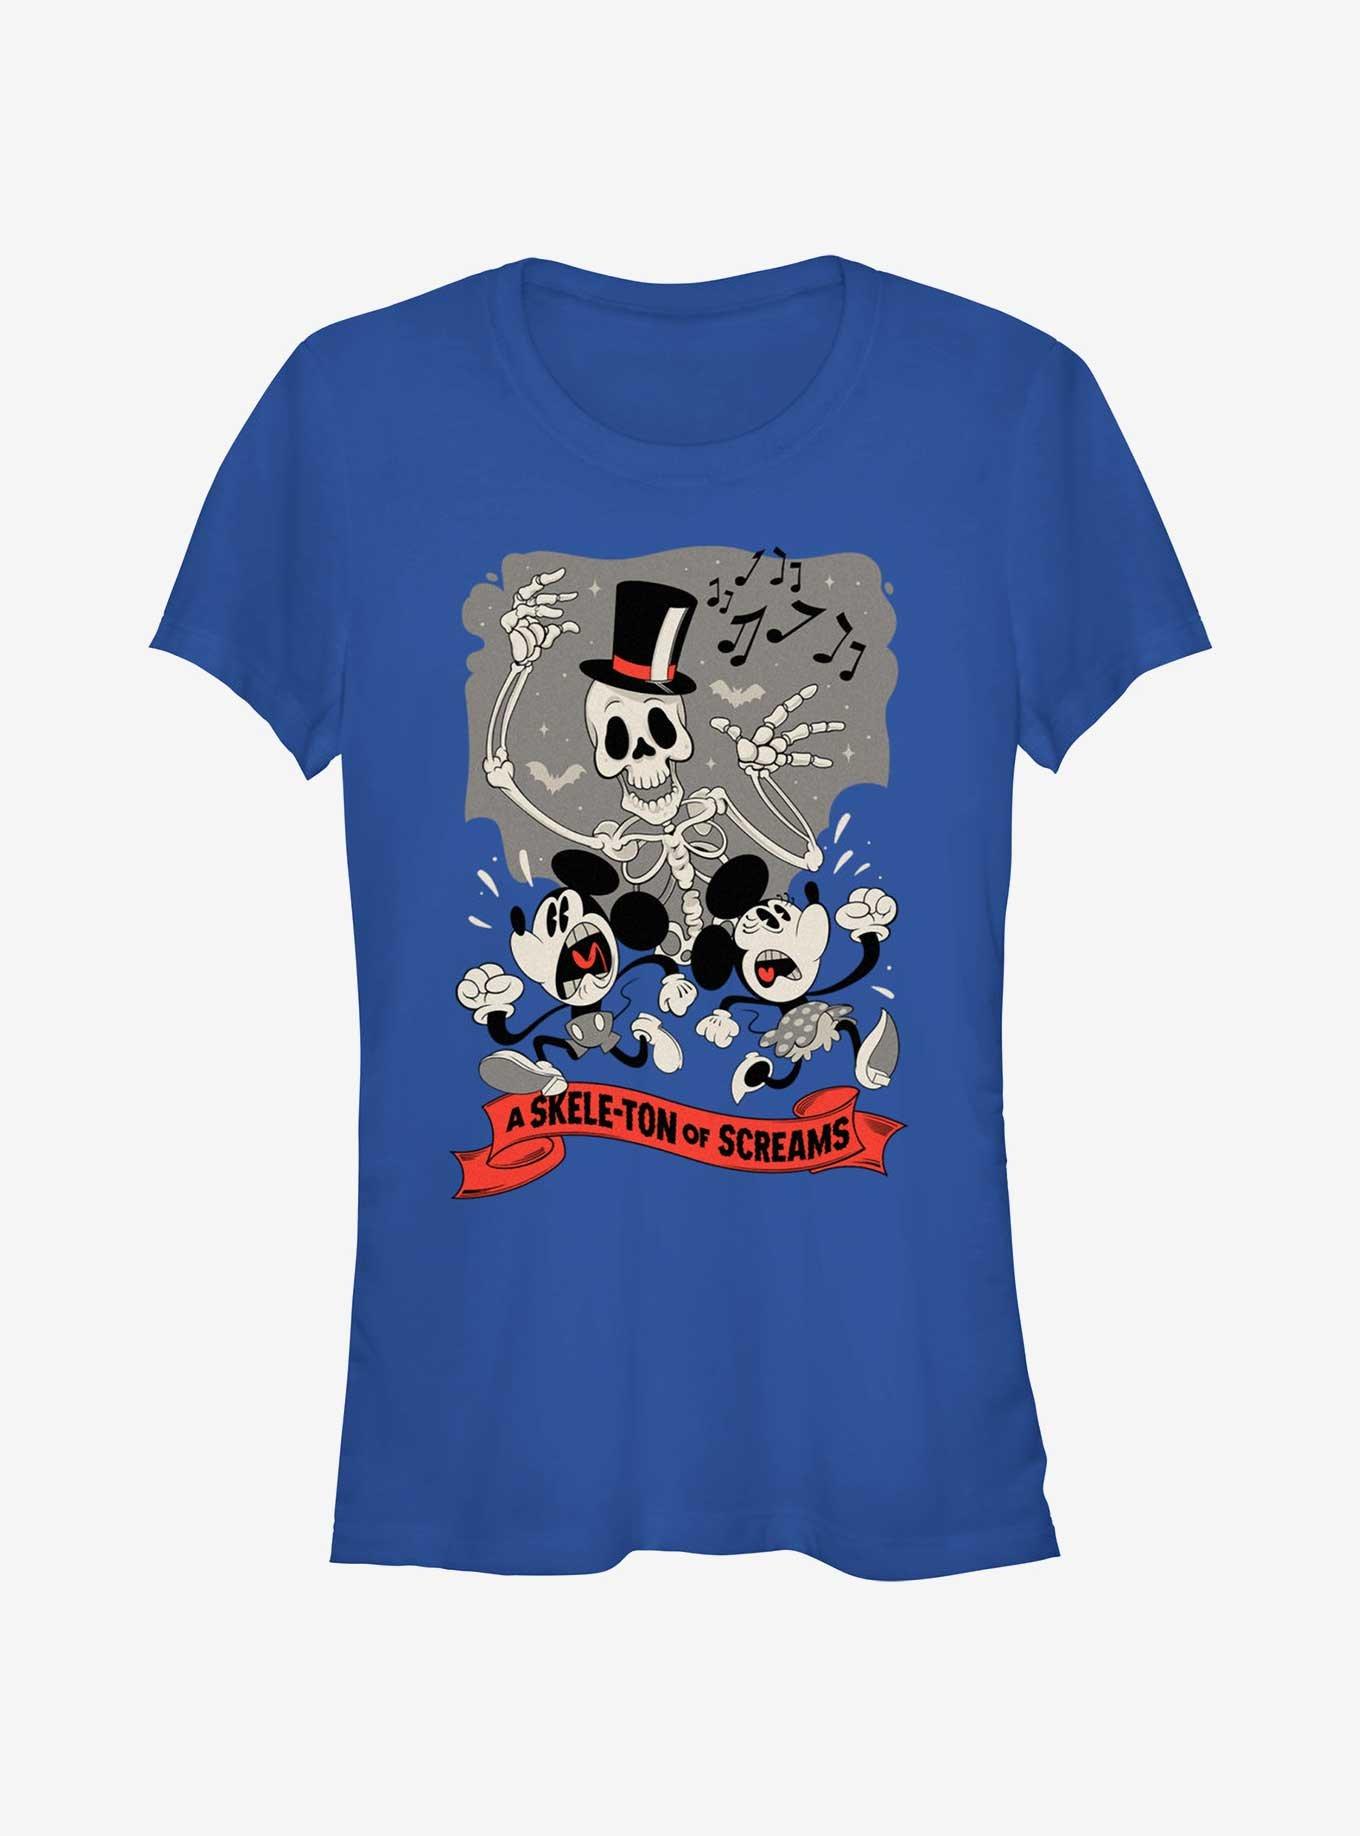 Disney Mickey Mouse A Skele-Ton of Screams Girls T-Shirt